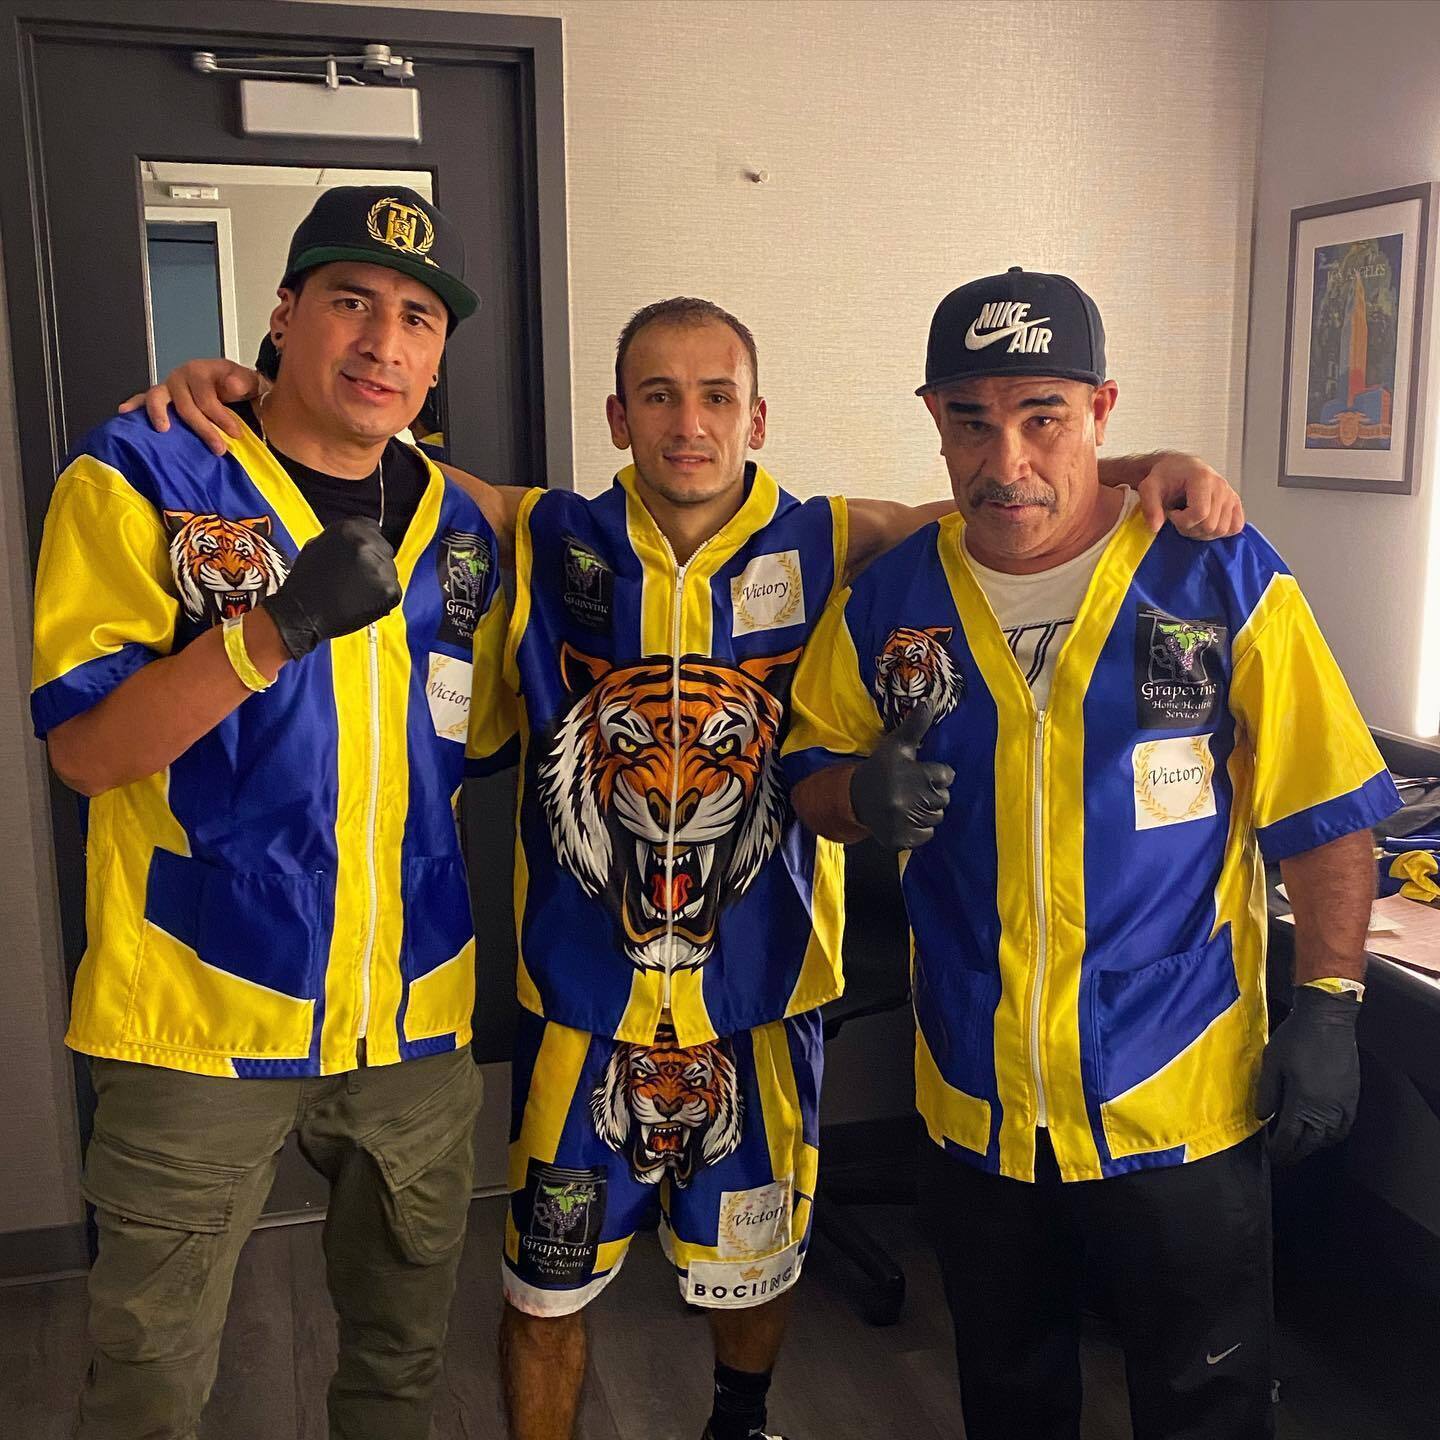 The Ukrainian boxing champion won a fight in the United States by knockout. Video